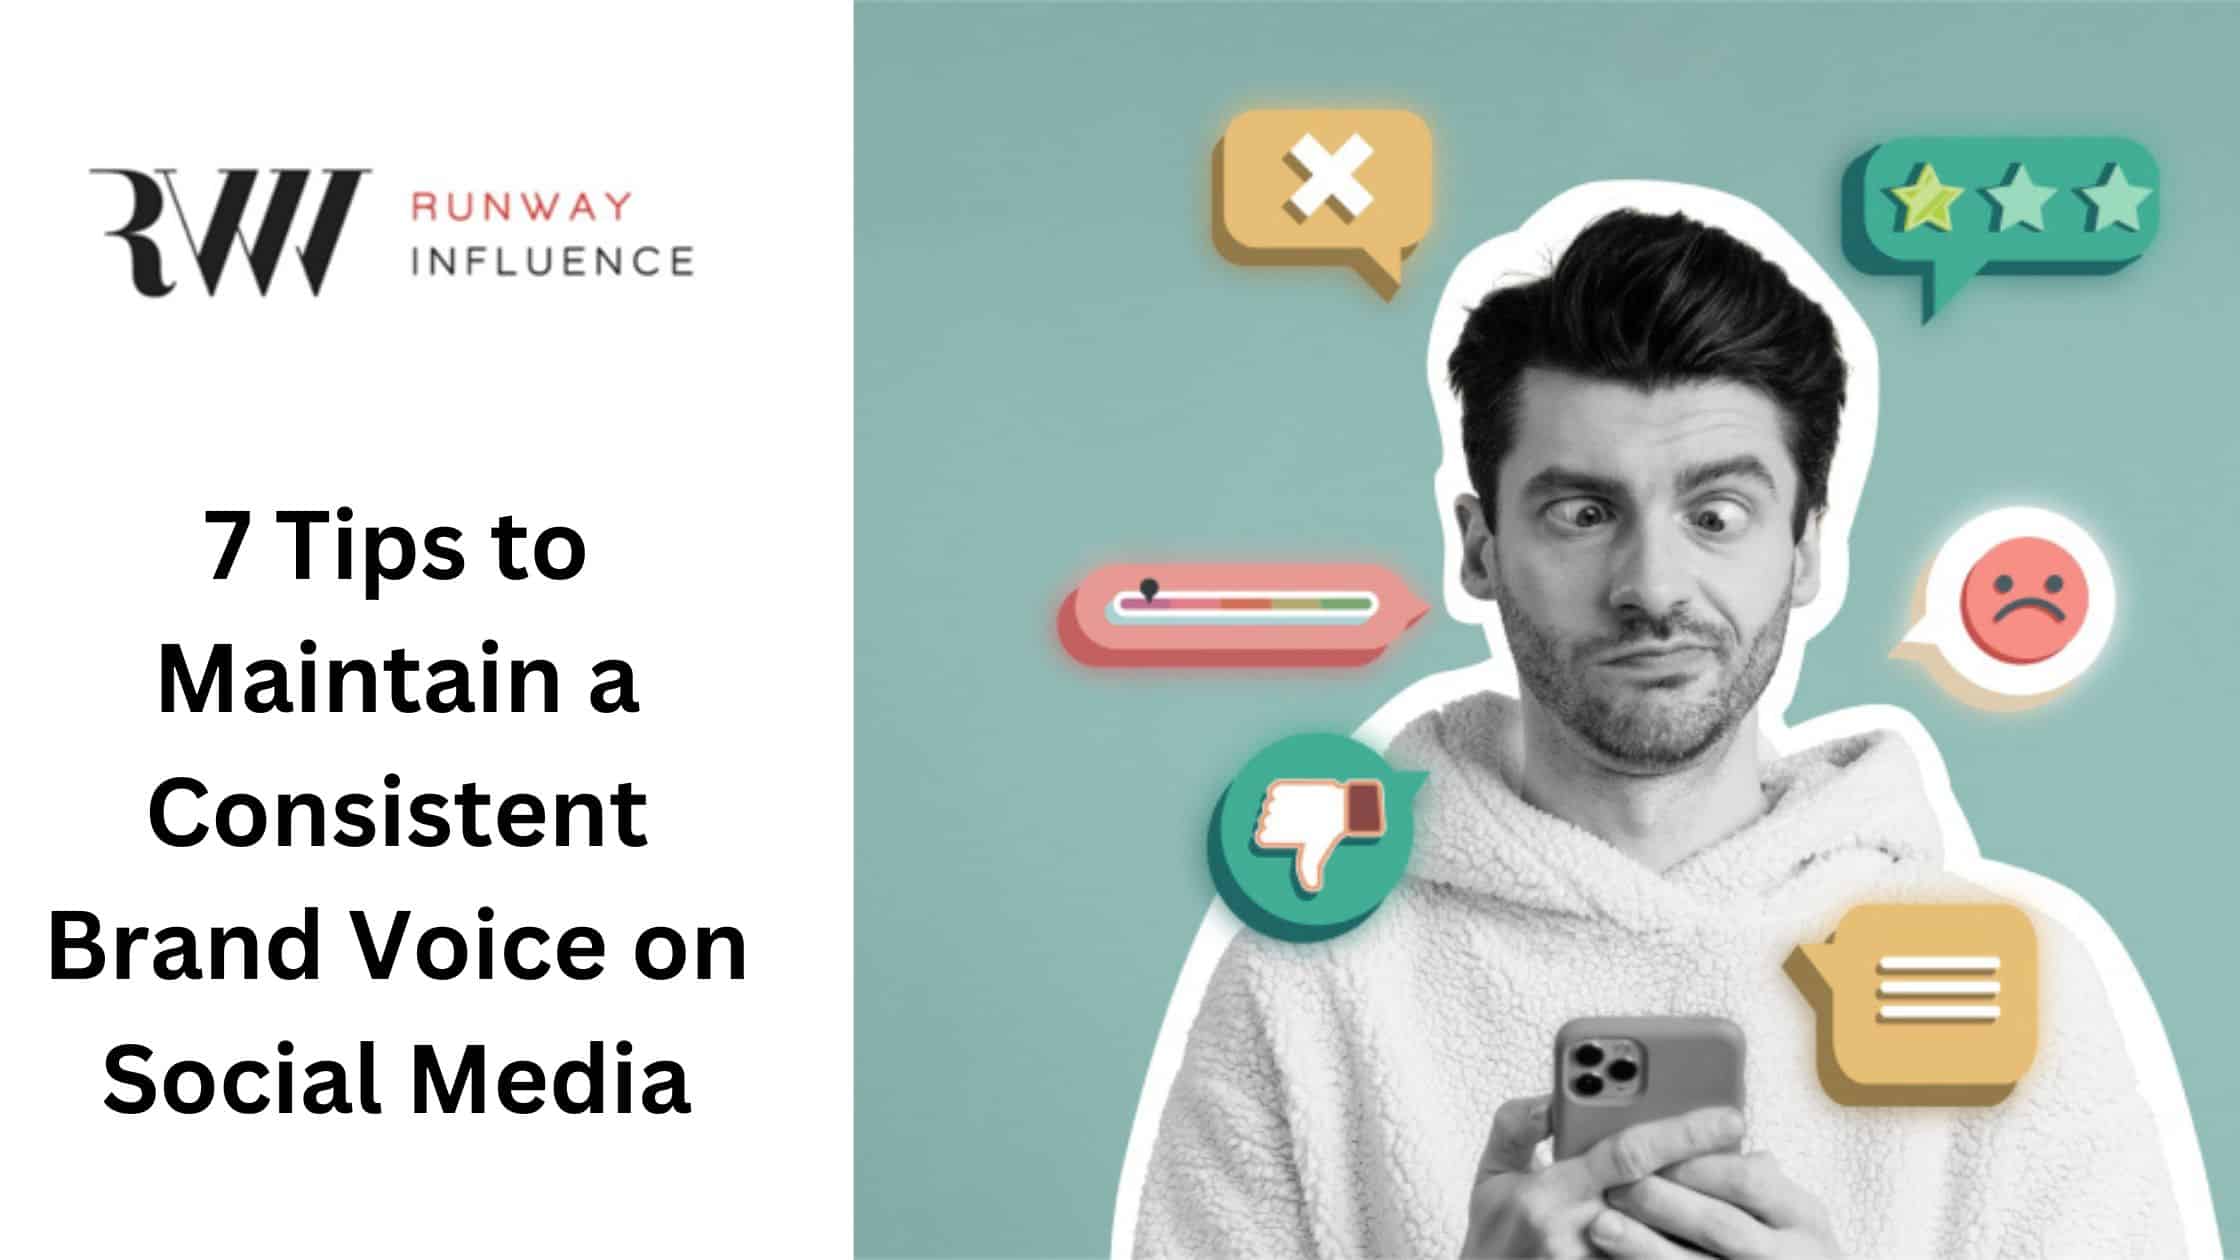 7 Tips to Maintain a Consistent Brand Voice on Social Media